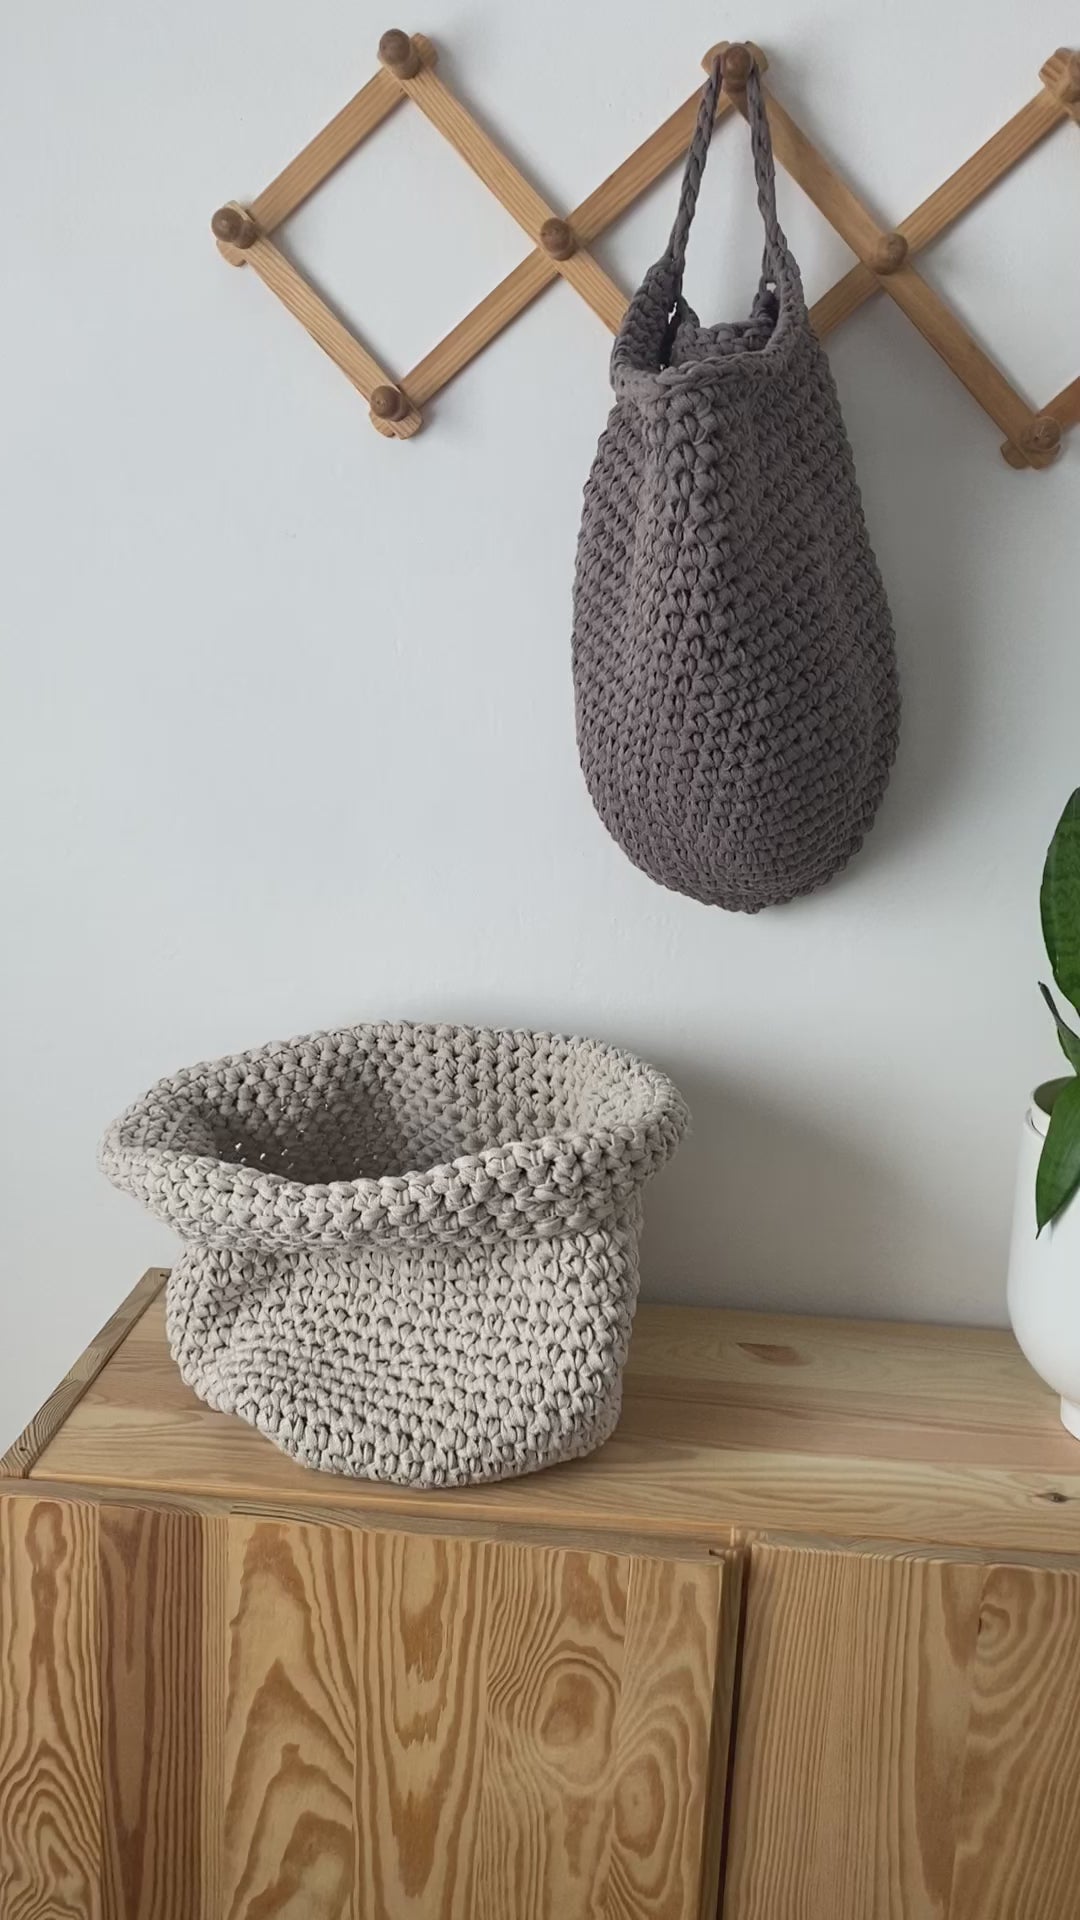 video of crochet wall hanging baskets by looping home